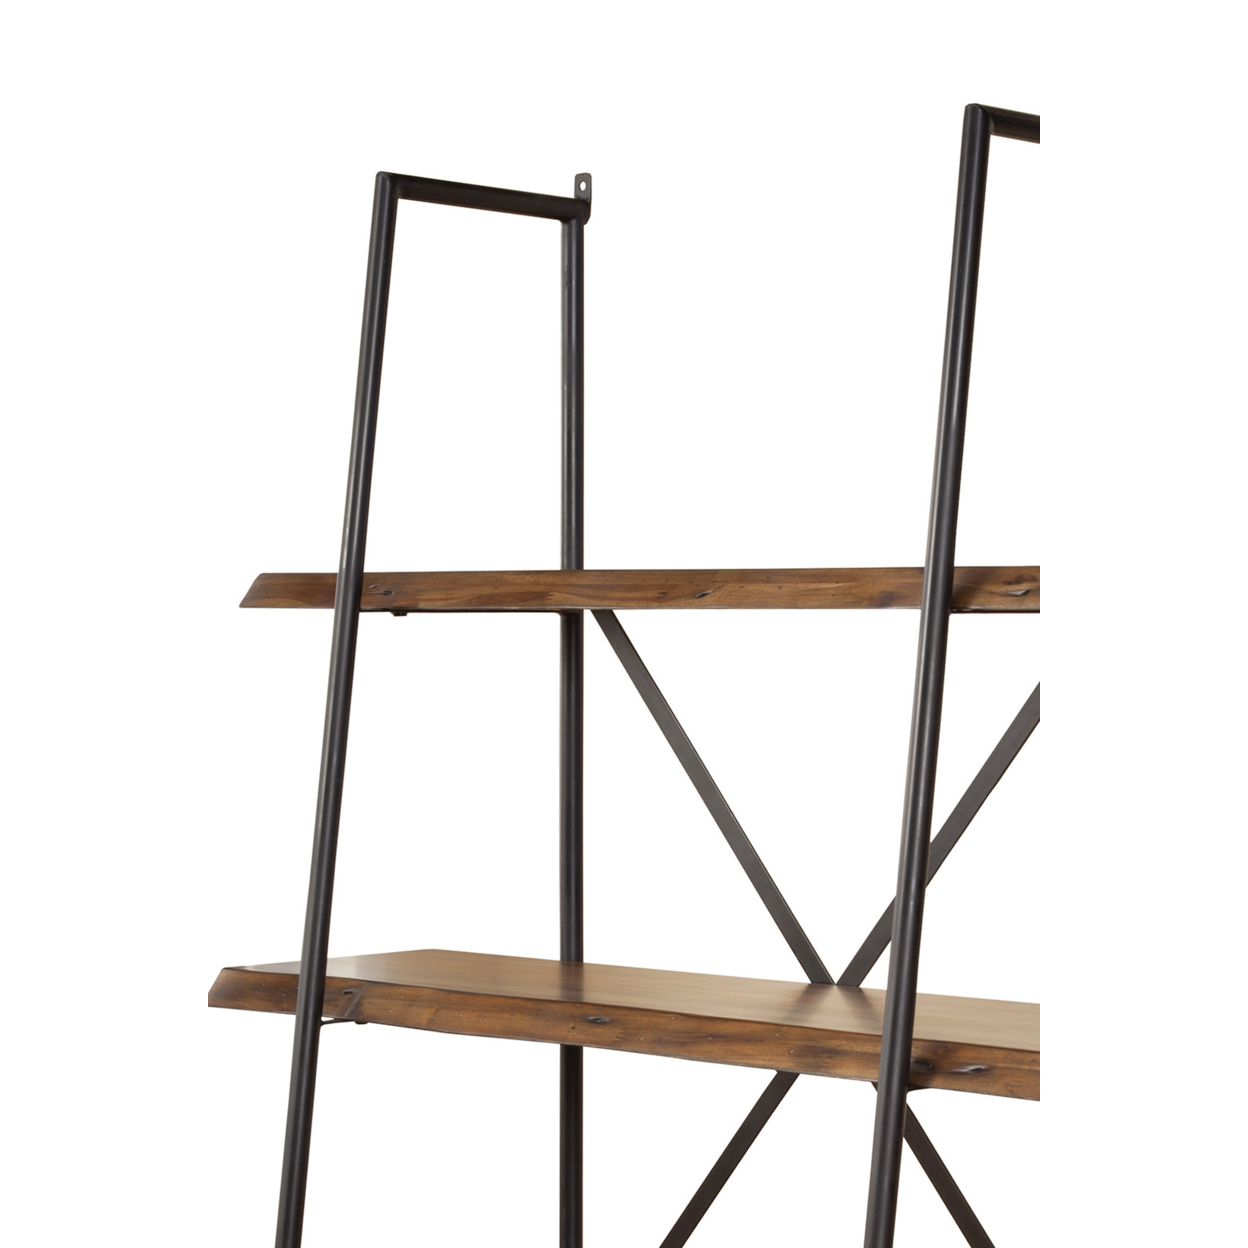 Wooden Bookshelf With A Sturdy Metal Frame And Four Shelves, Black And Brown- Saltoro Sherpi